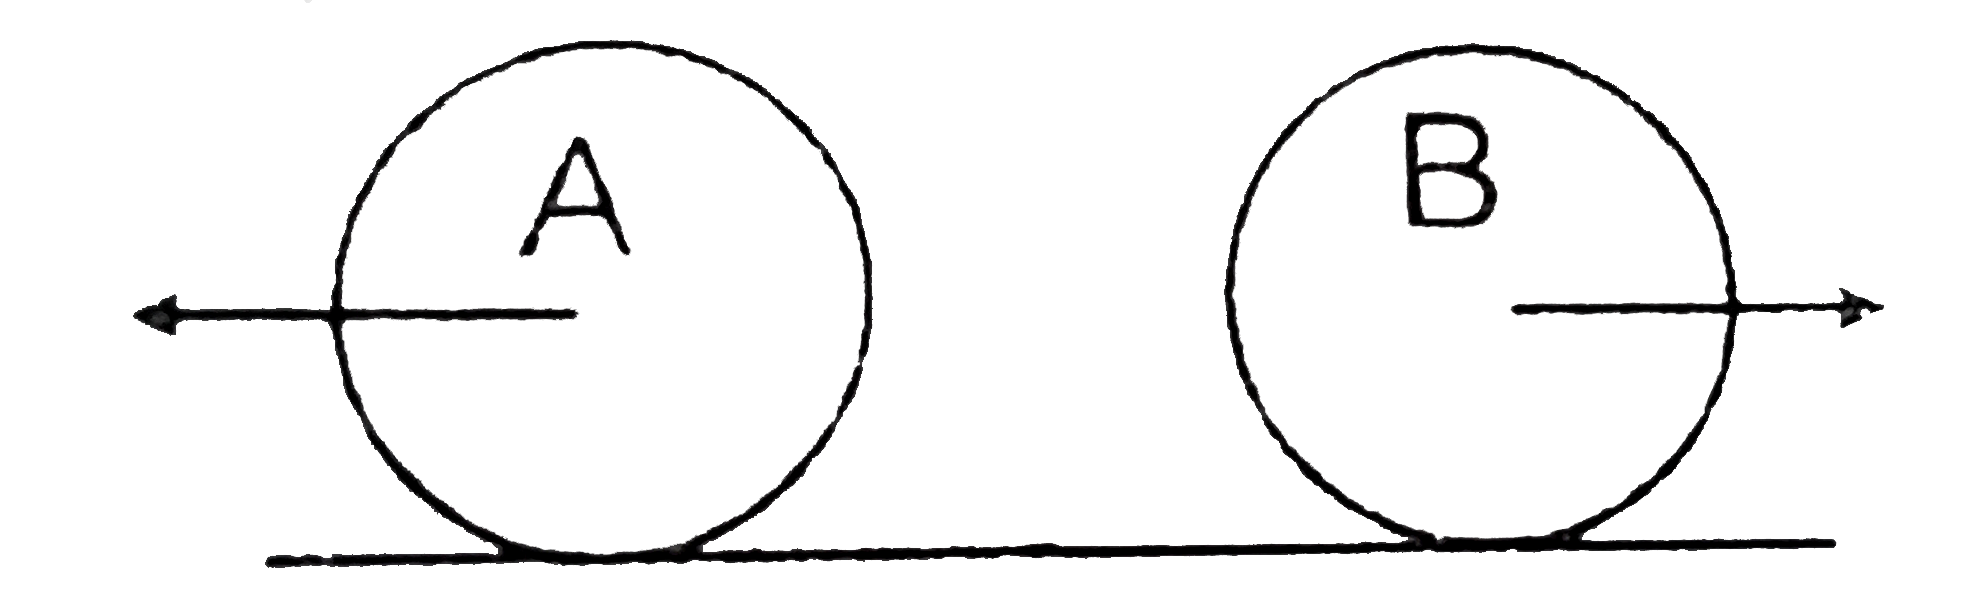 Two identical conducting rings A & B of radius R are in pure rolling over a horizontal conducting plane with same speed (of centre of mass) upsilon but in opposite direction. A constant magnetic field B is present pointing inside the plane of paper. Then the potential difference between the highest points of the two rings, is :